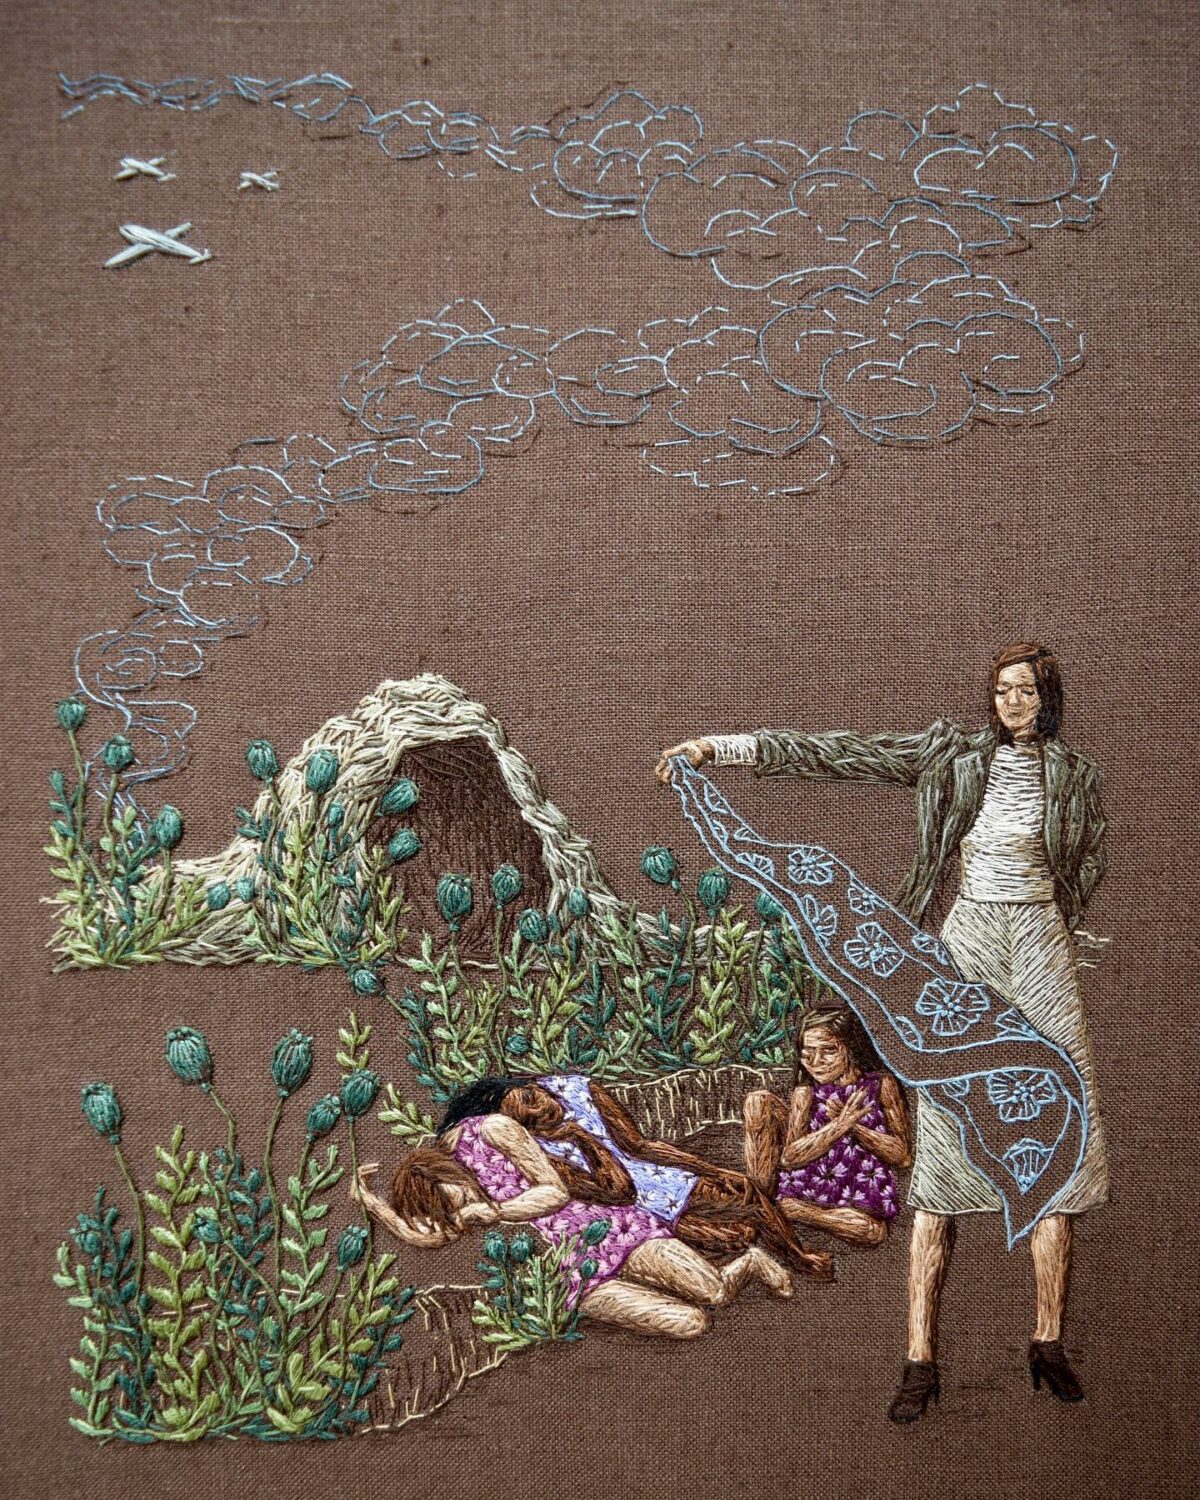 Fascinating Embroidered Scenarios Of Minimalist Landscapes With Introspective People By Michelle Kingdom 11